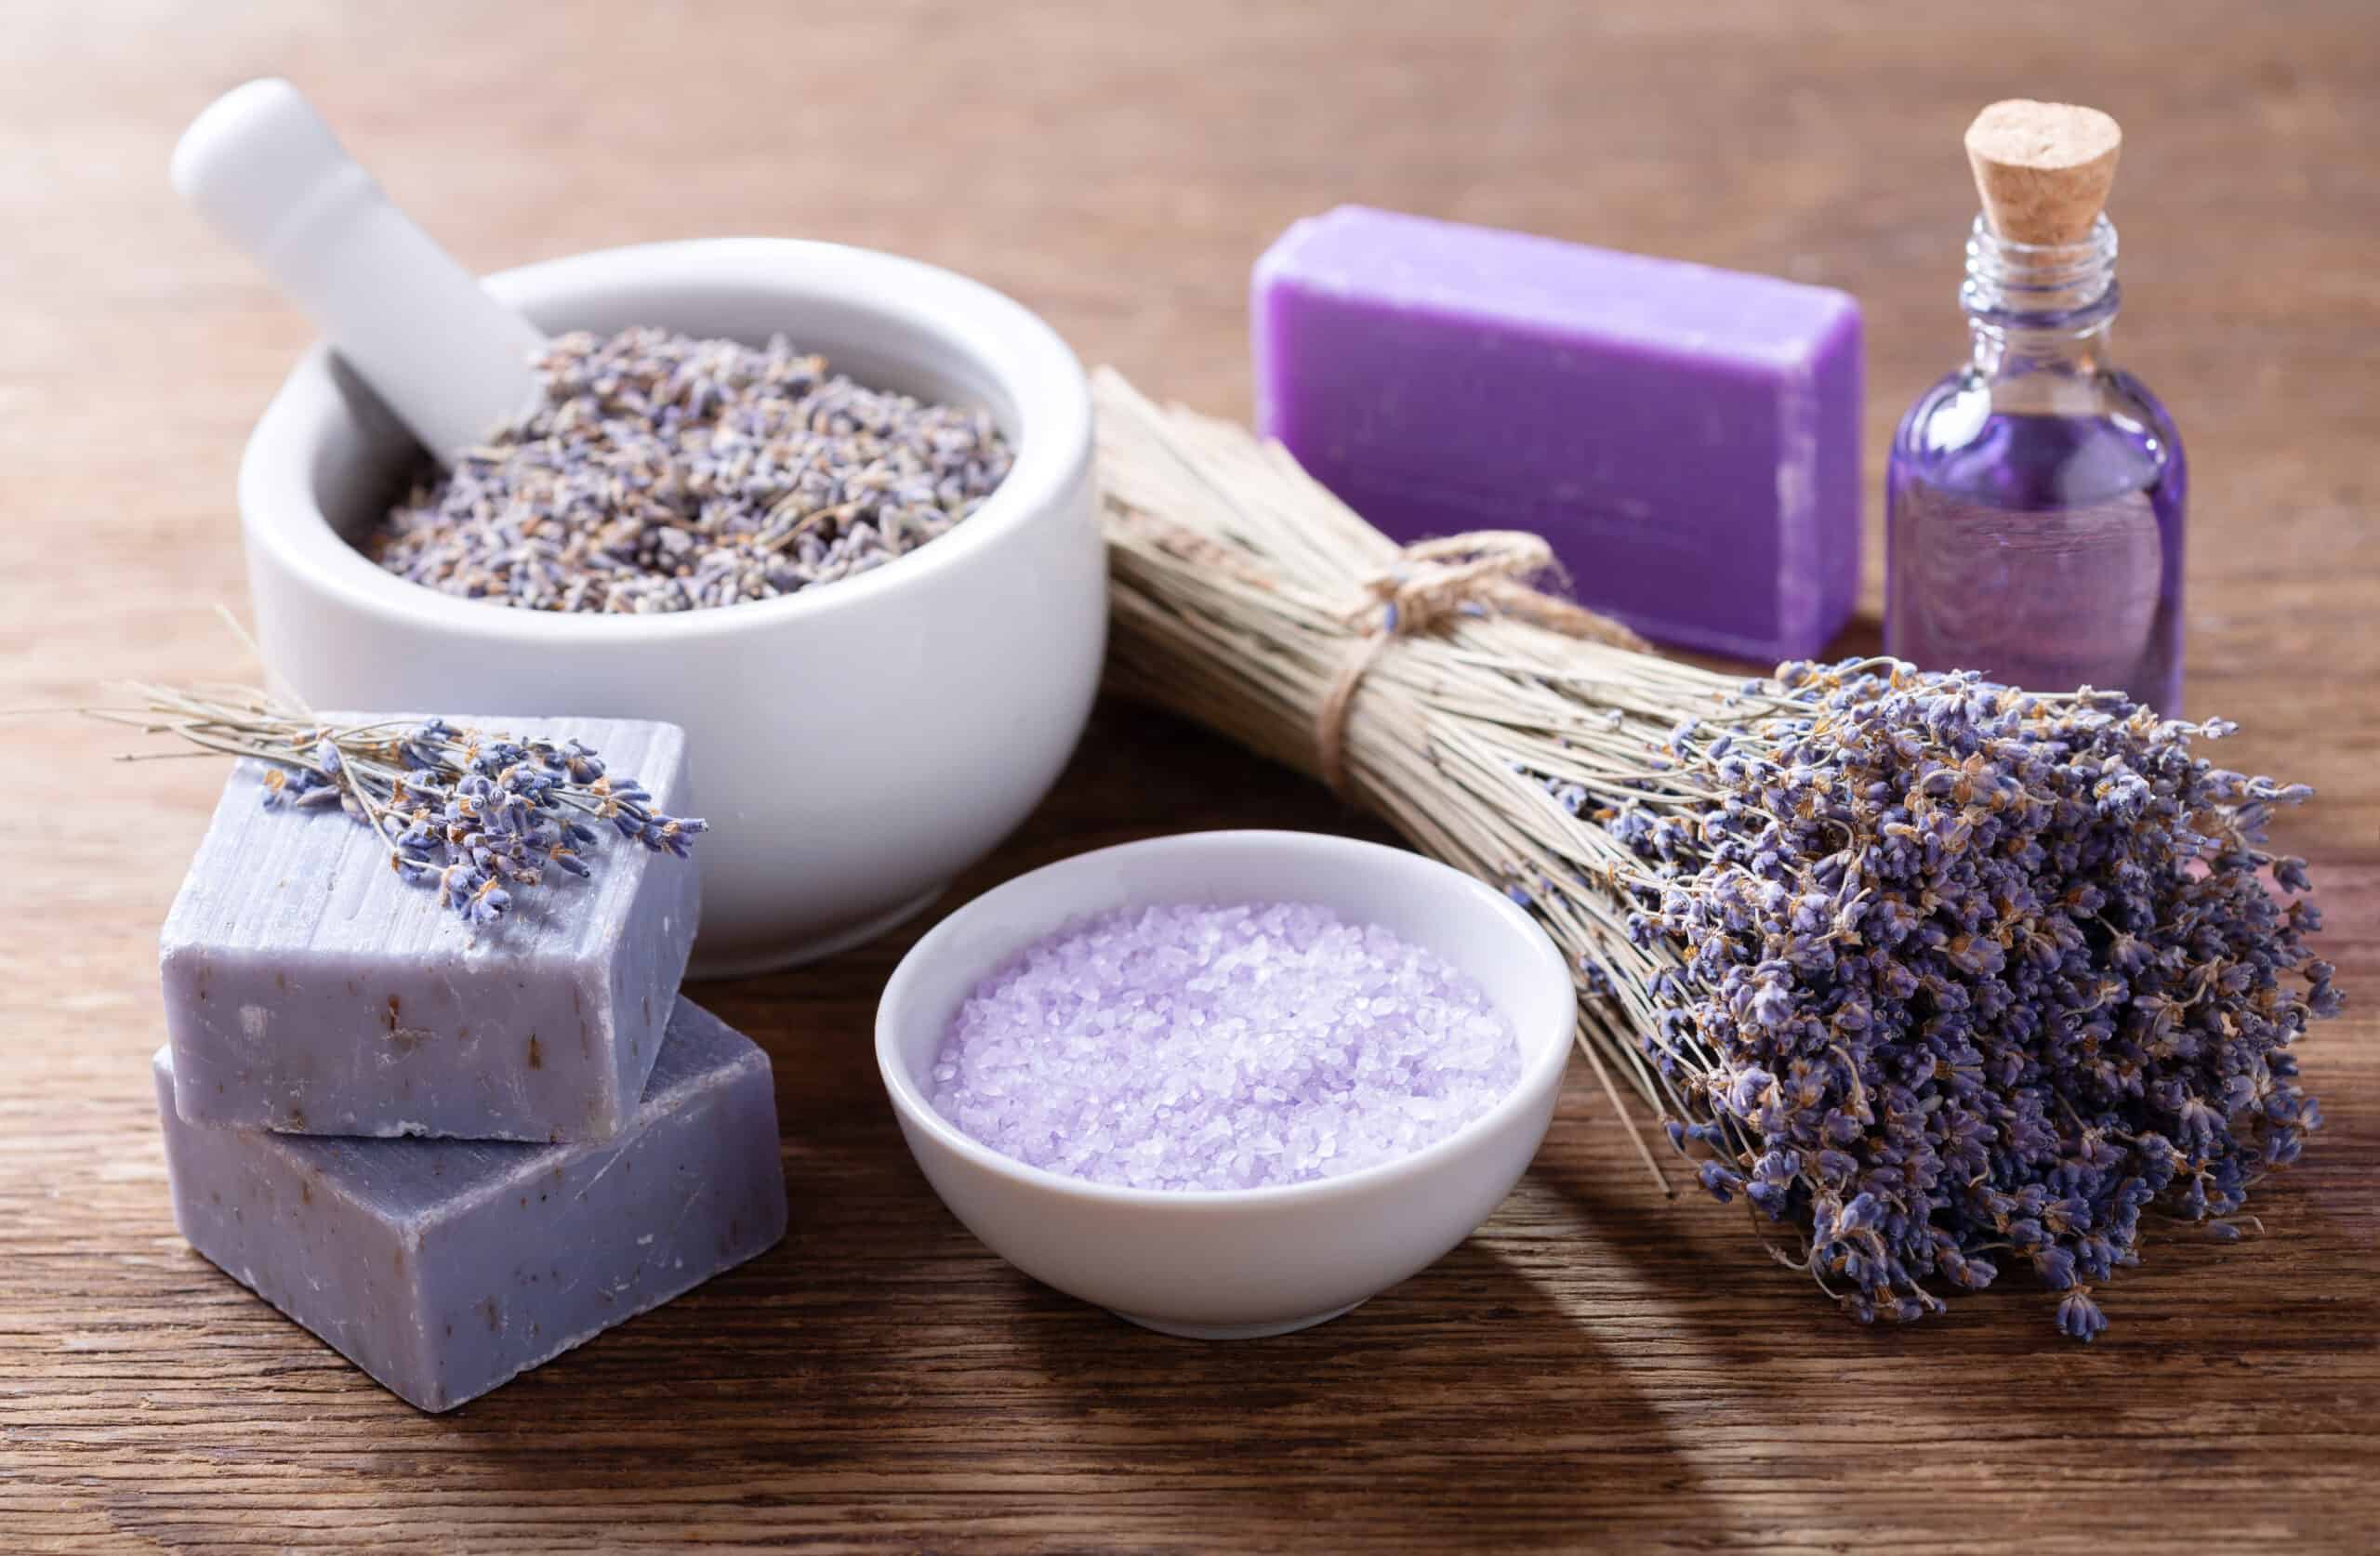 Lavender spa products rich in linalool